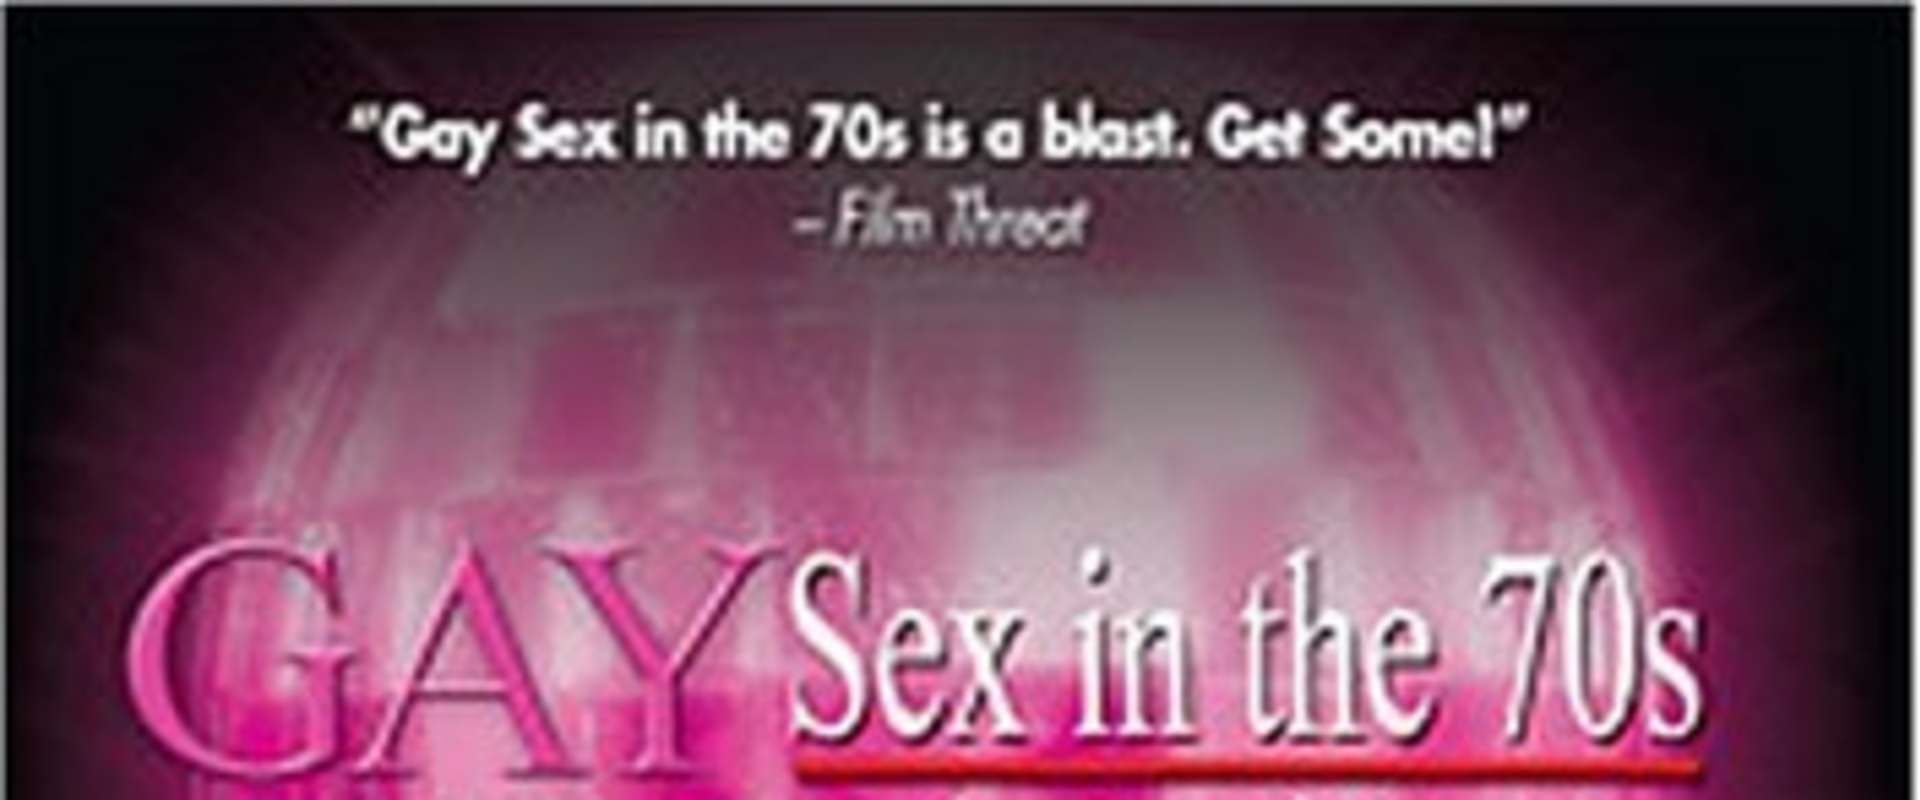 Gay Sex in the 70s background 2